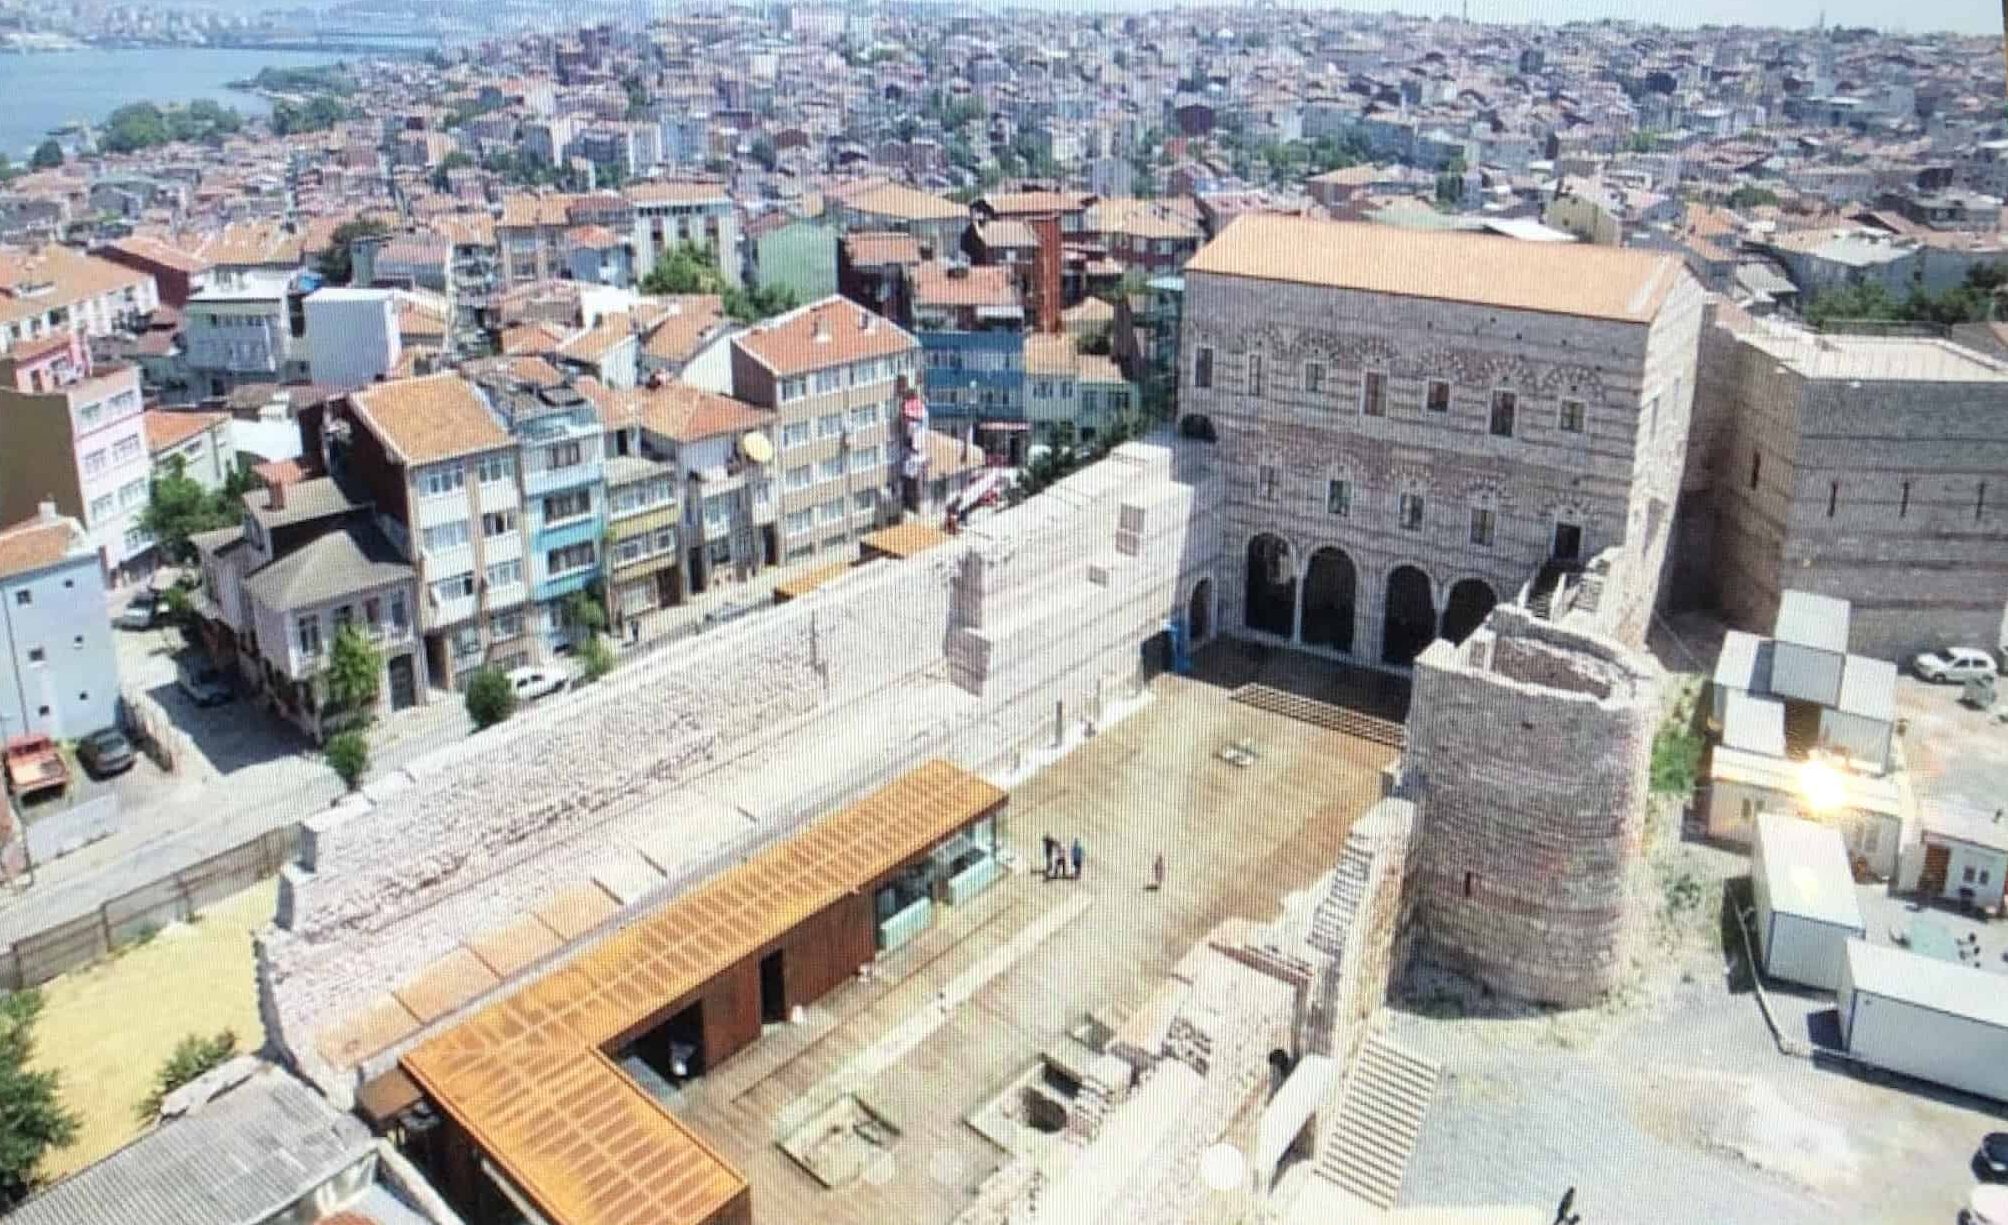 Overhead view of the Palace of the Porphyrogenitus after restoration at the Tekfur Palace Museum in Istanbul, Turkey